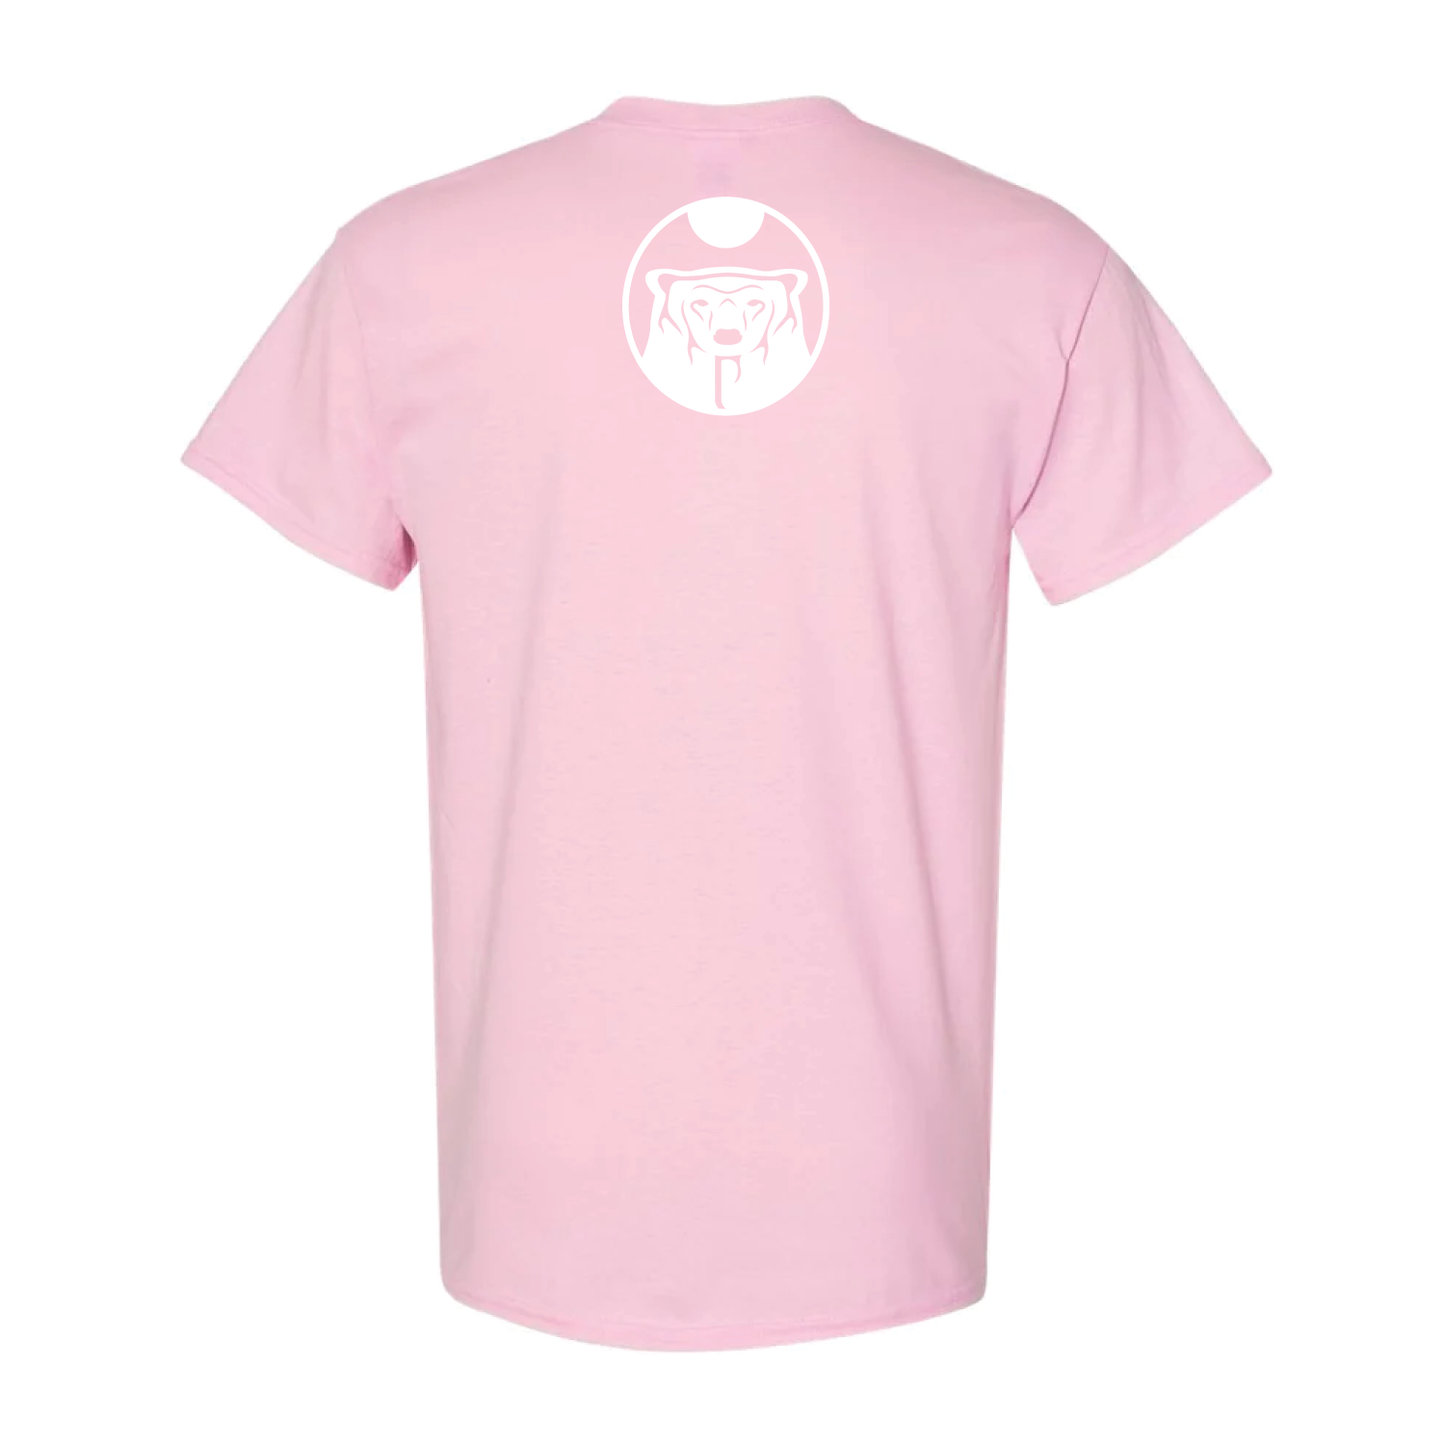 Adult/Youth Pink Shirt Day T-Shirts